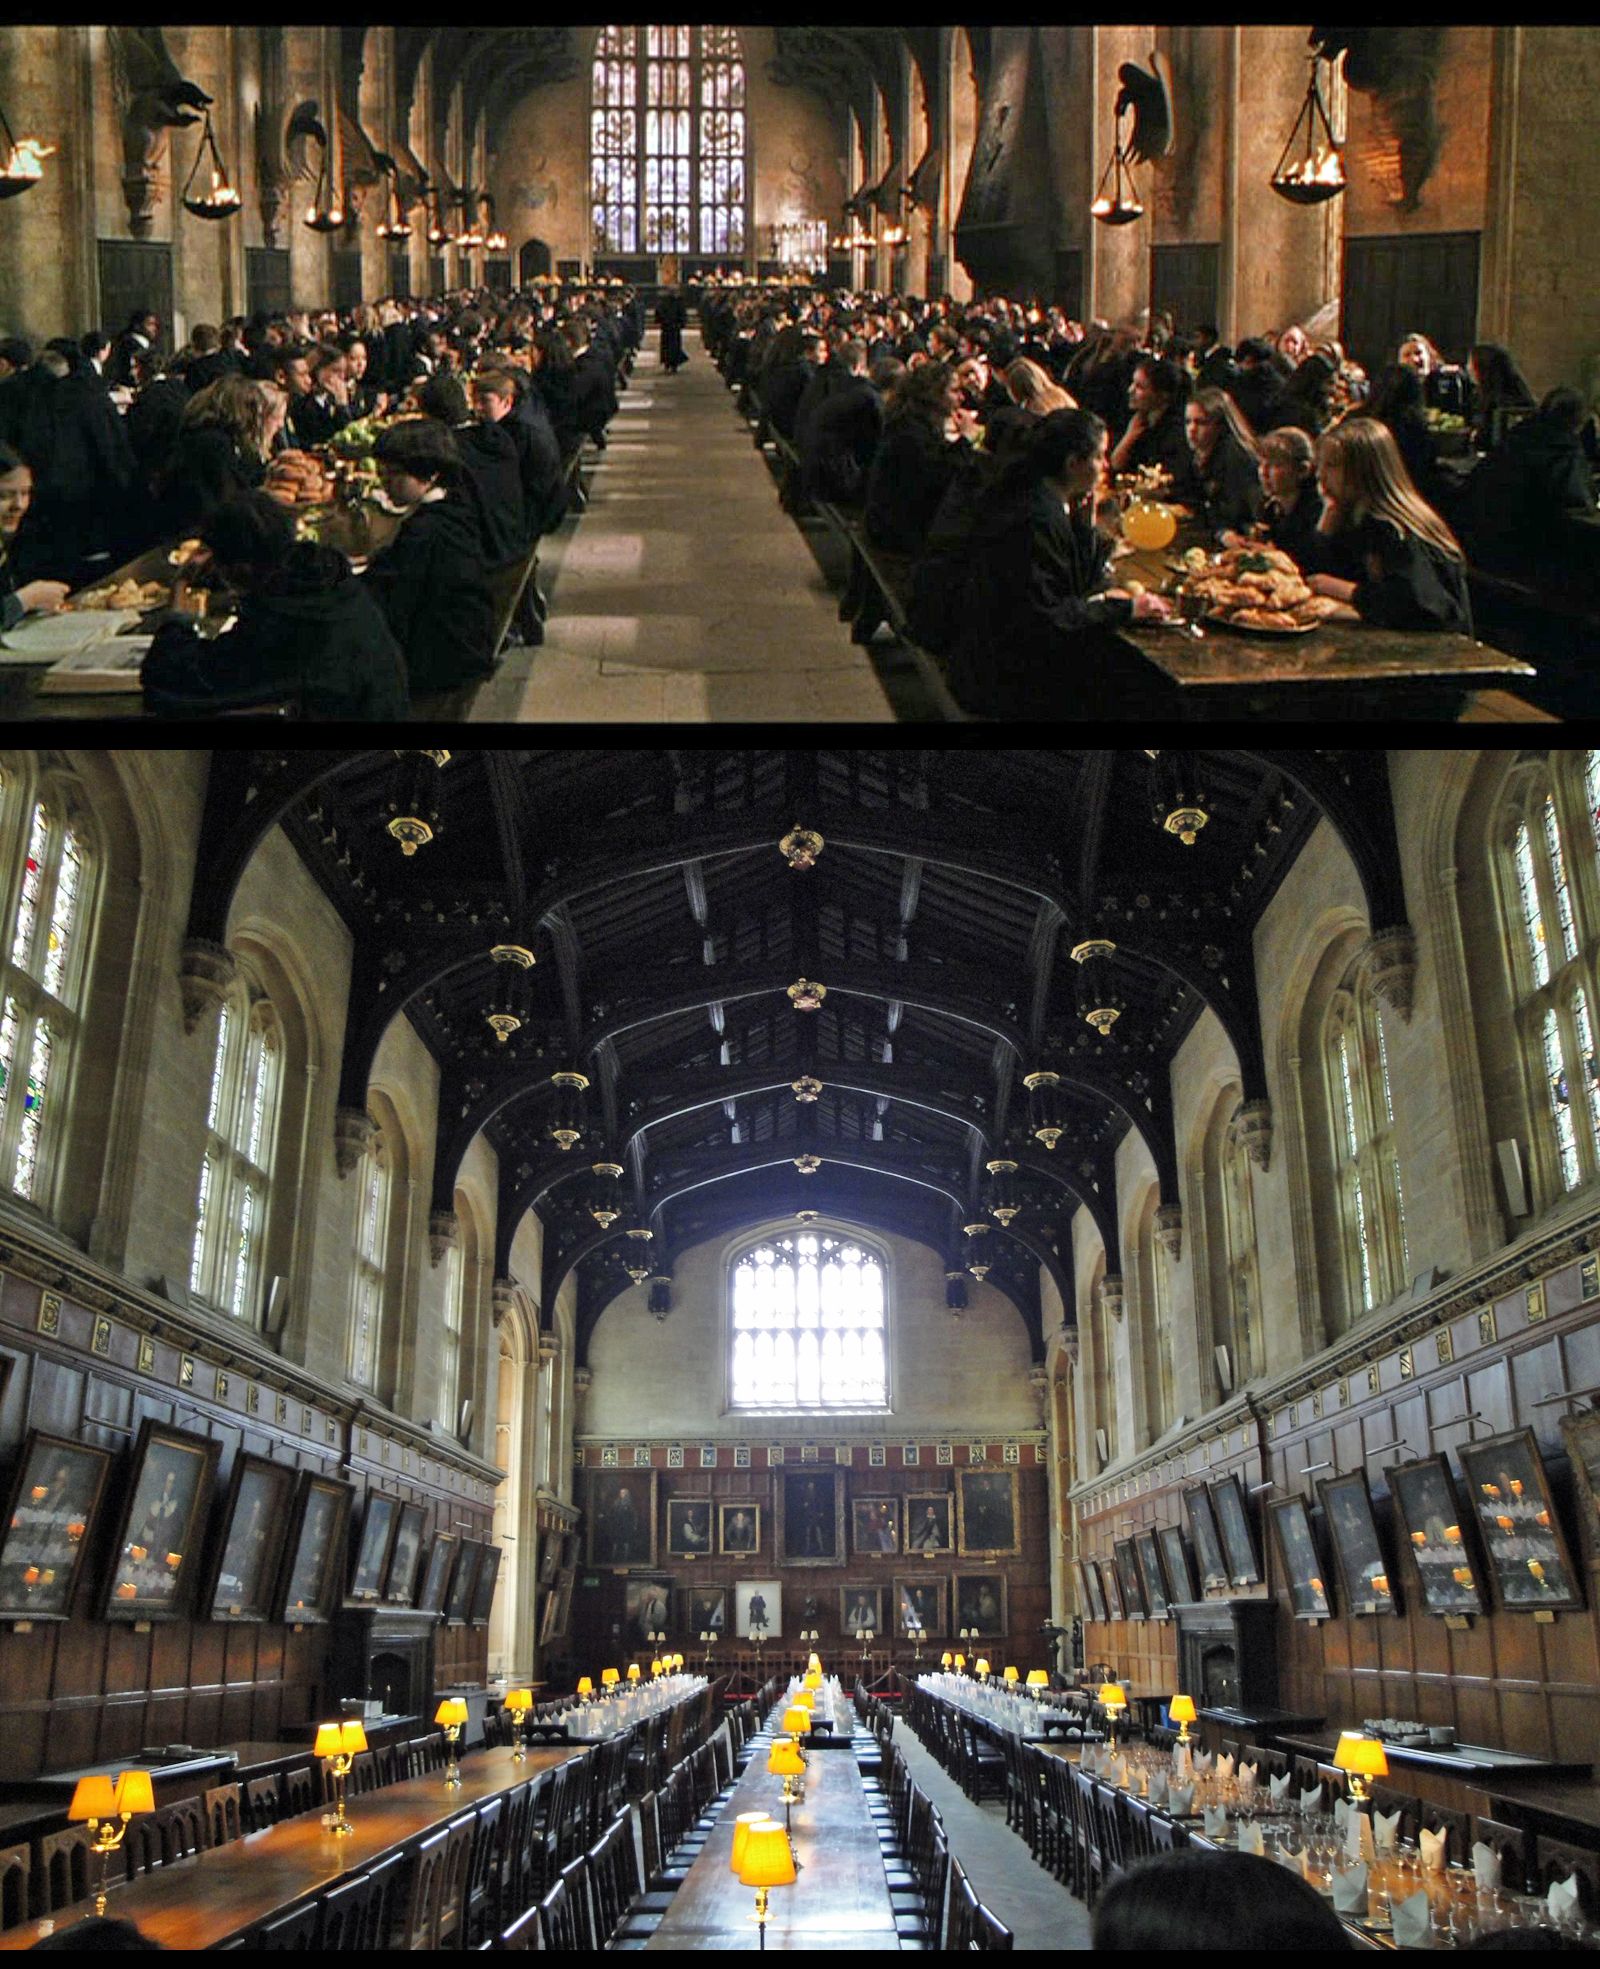 The Hogwarts Great Hall set design seen in all Harry Potter Movies was ...